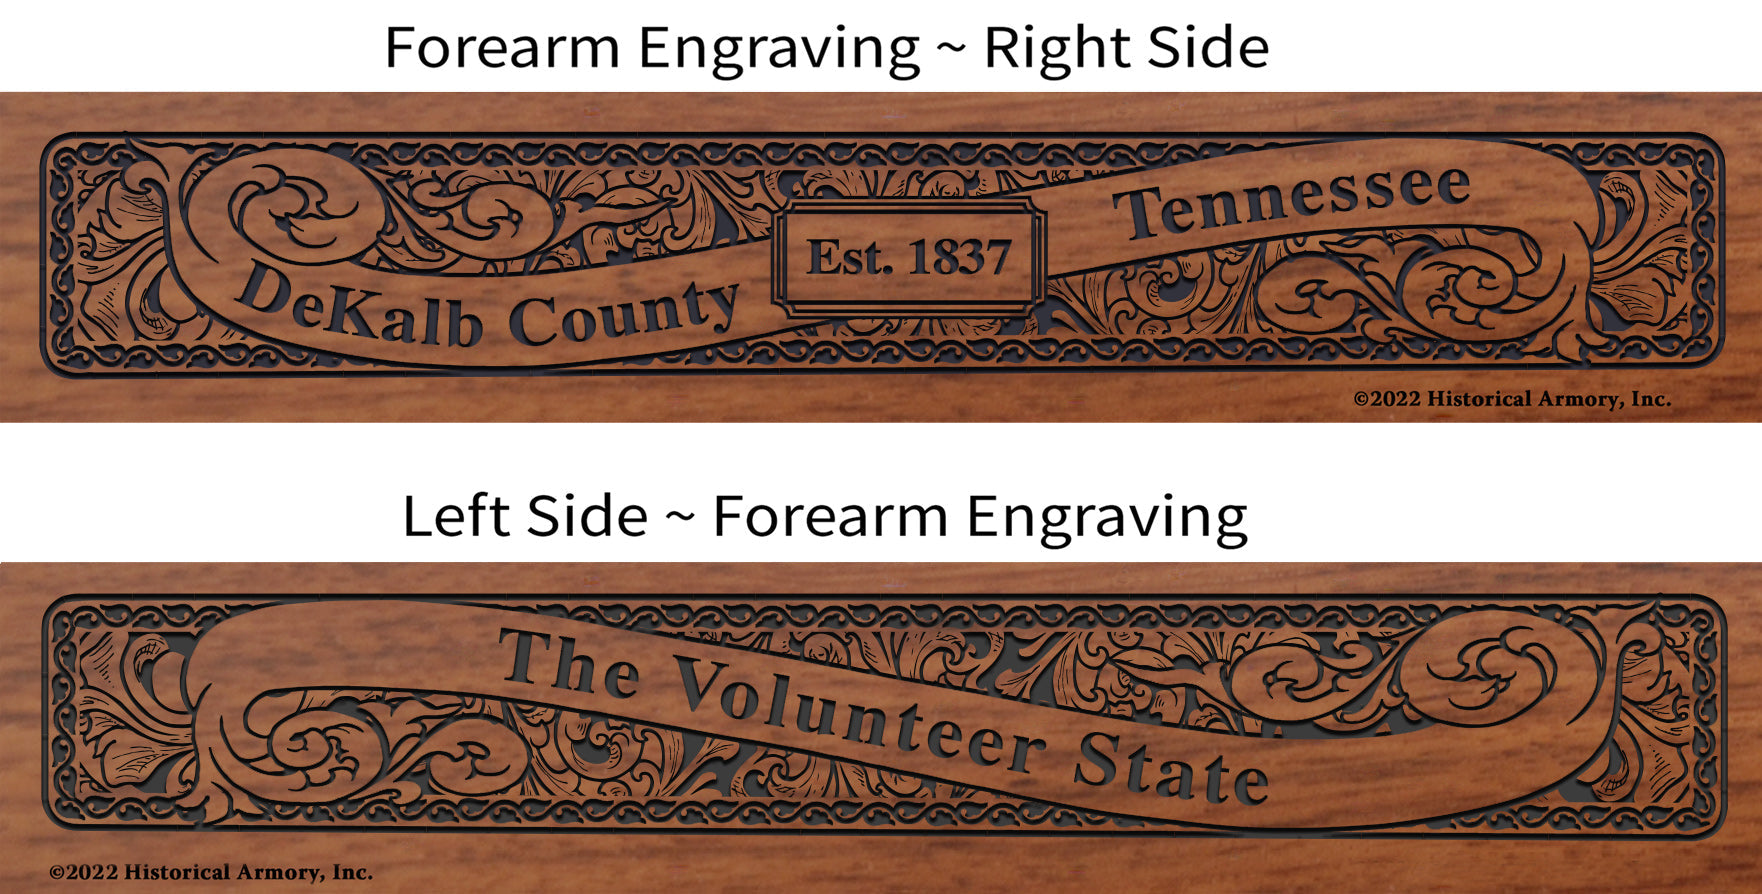 DeKalb County Tennessee Engraved Rifle Forearm